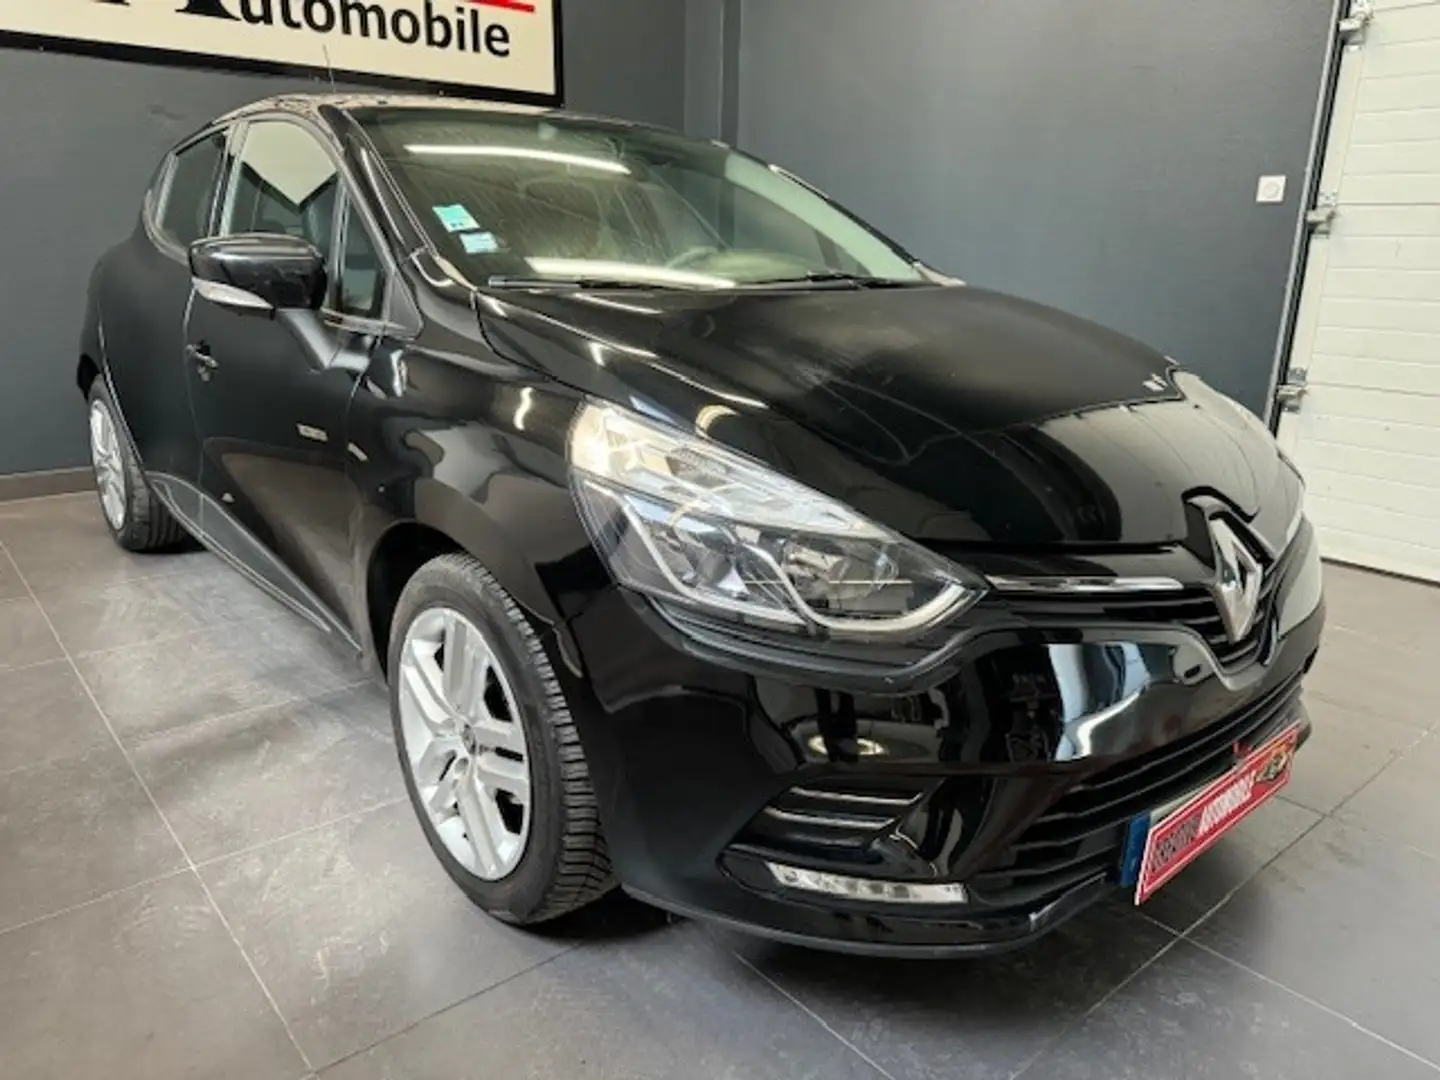 Renault Clio 0.9 TCe 75 CV 70 000 KMS - 2